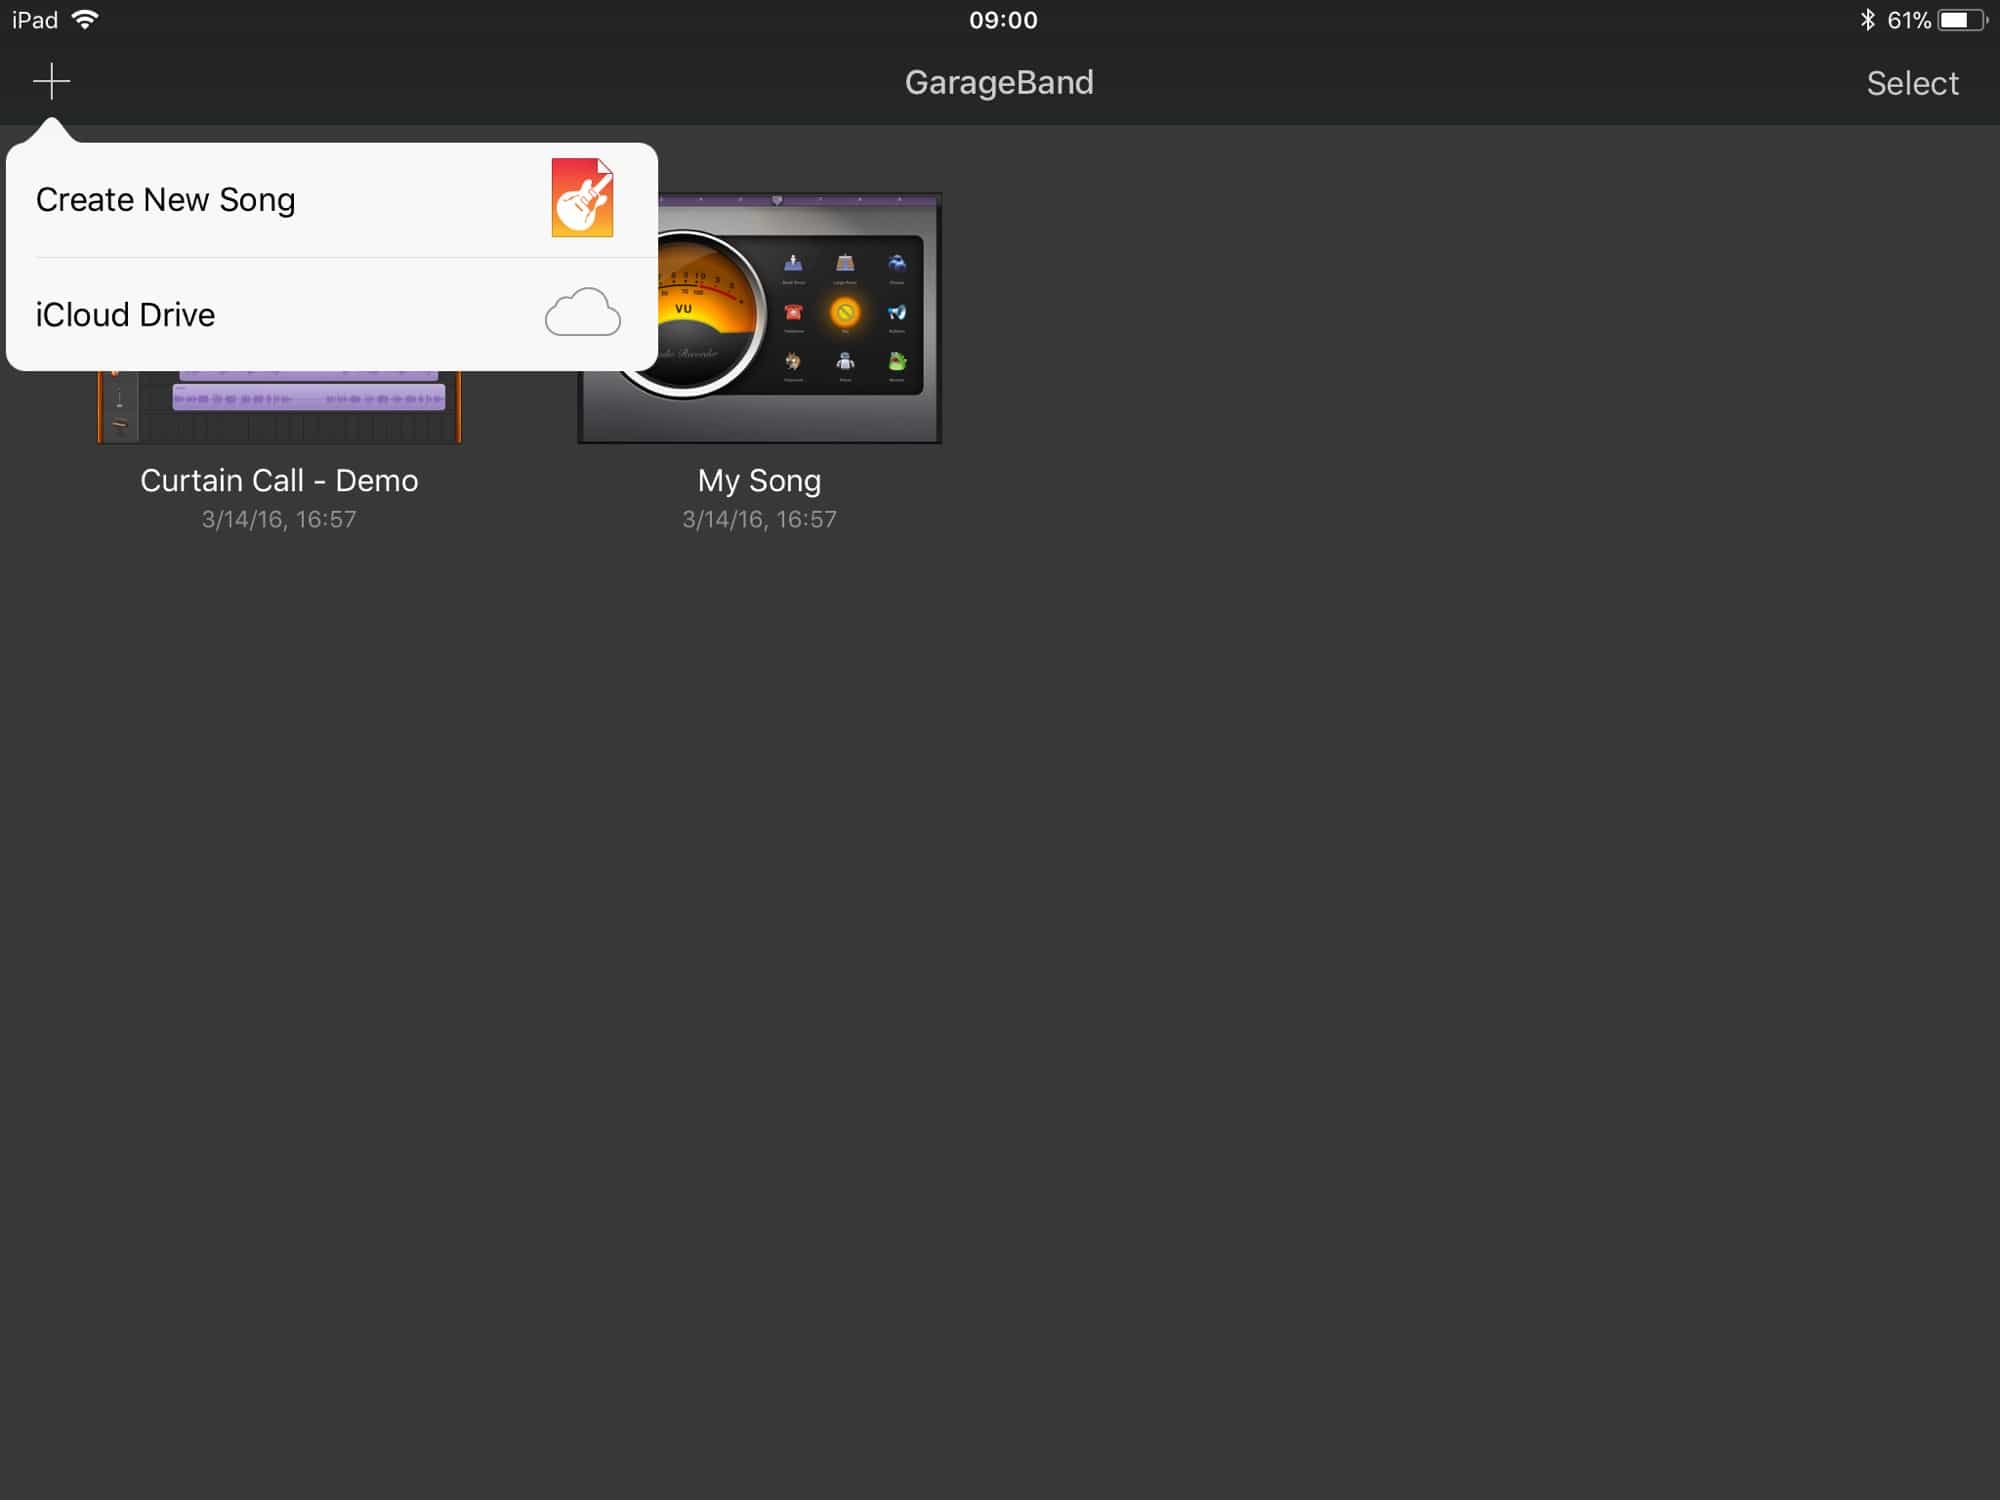 How to email someone a garageband project from ipad